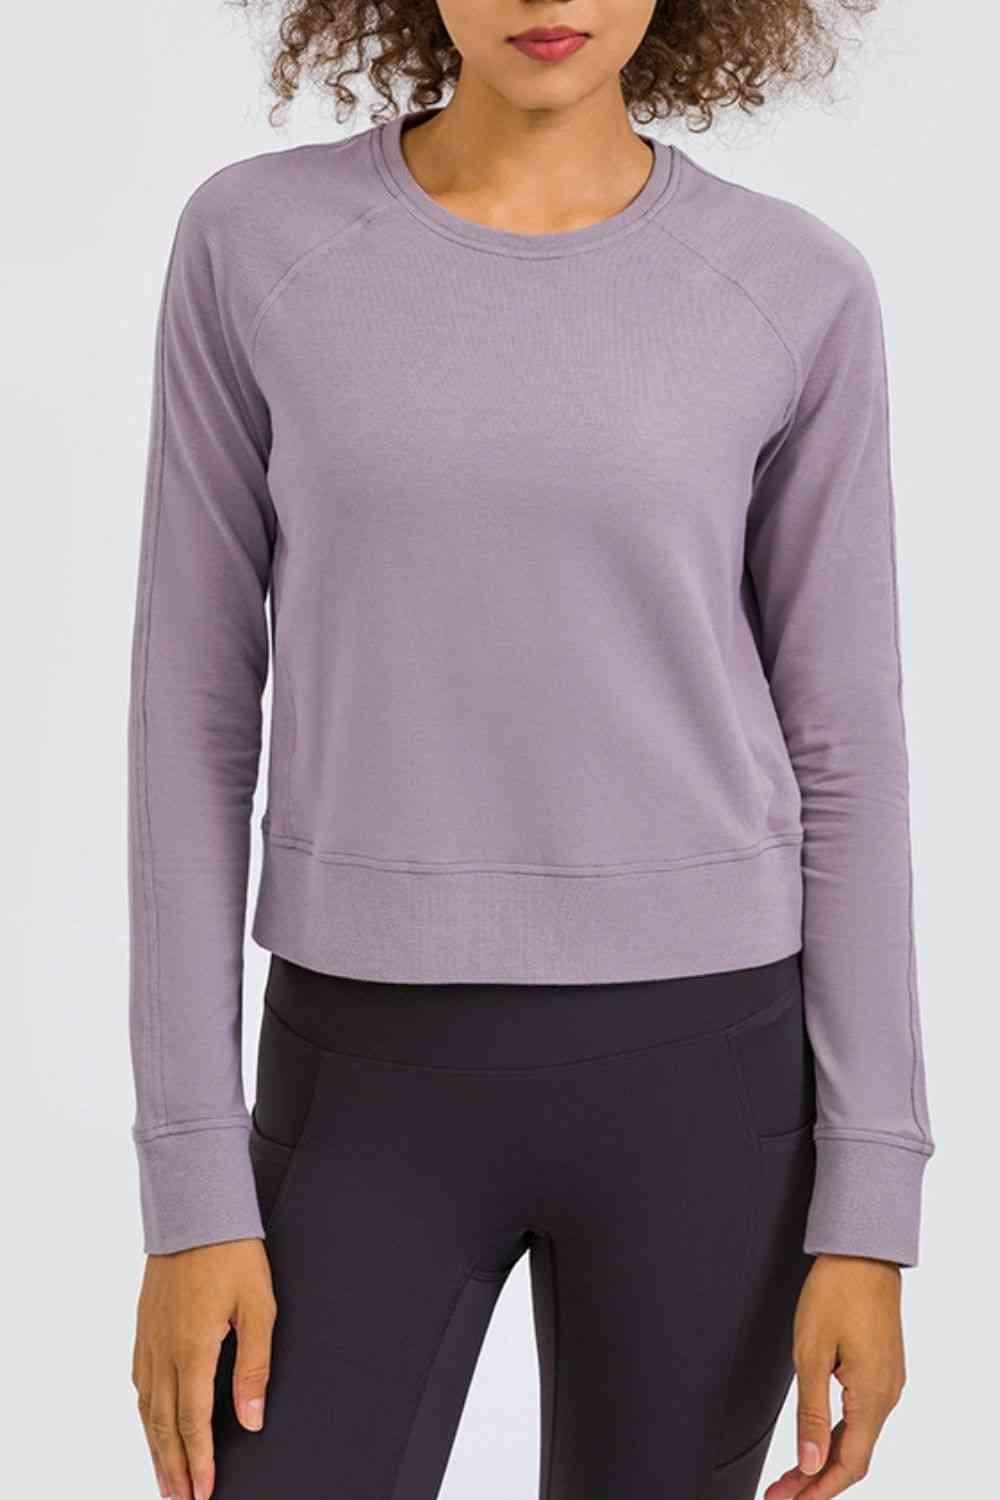 Cozy and Fabulous Raglan Sleeve Sports Top - Immenzive